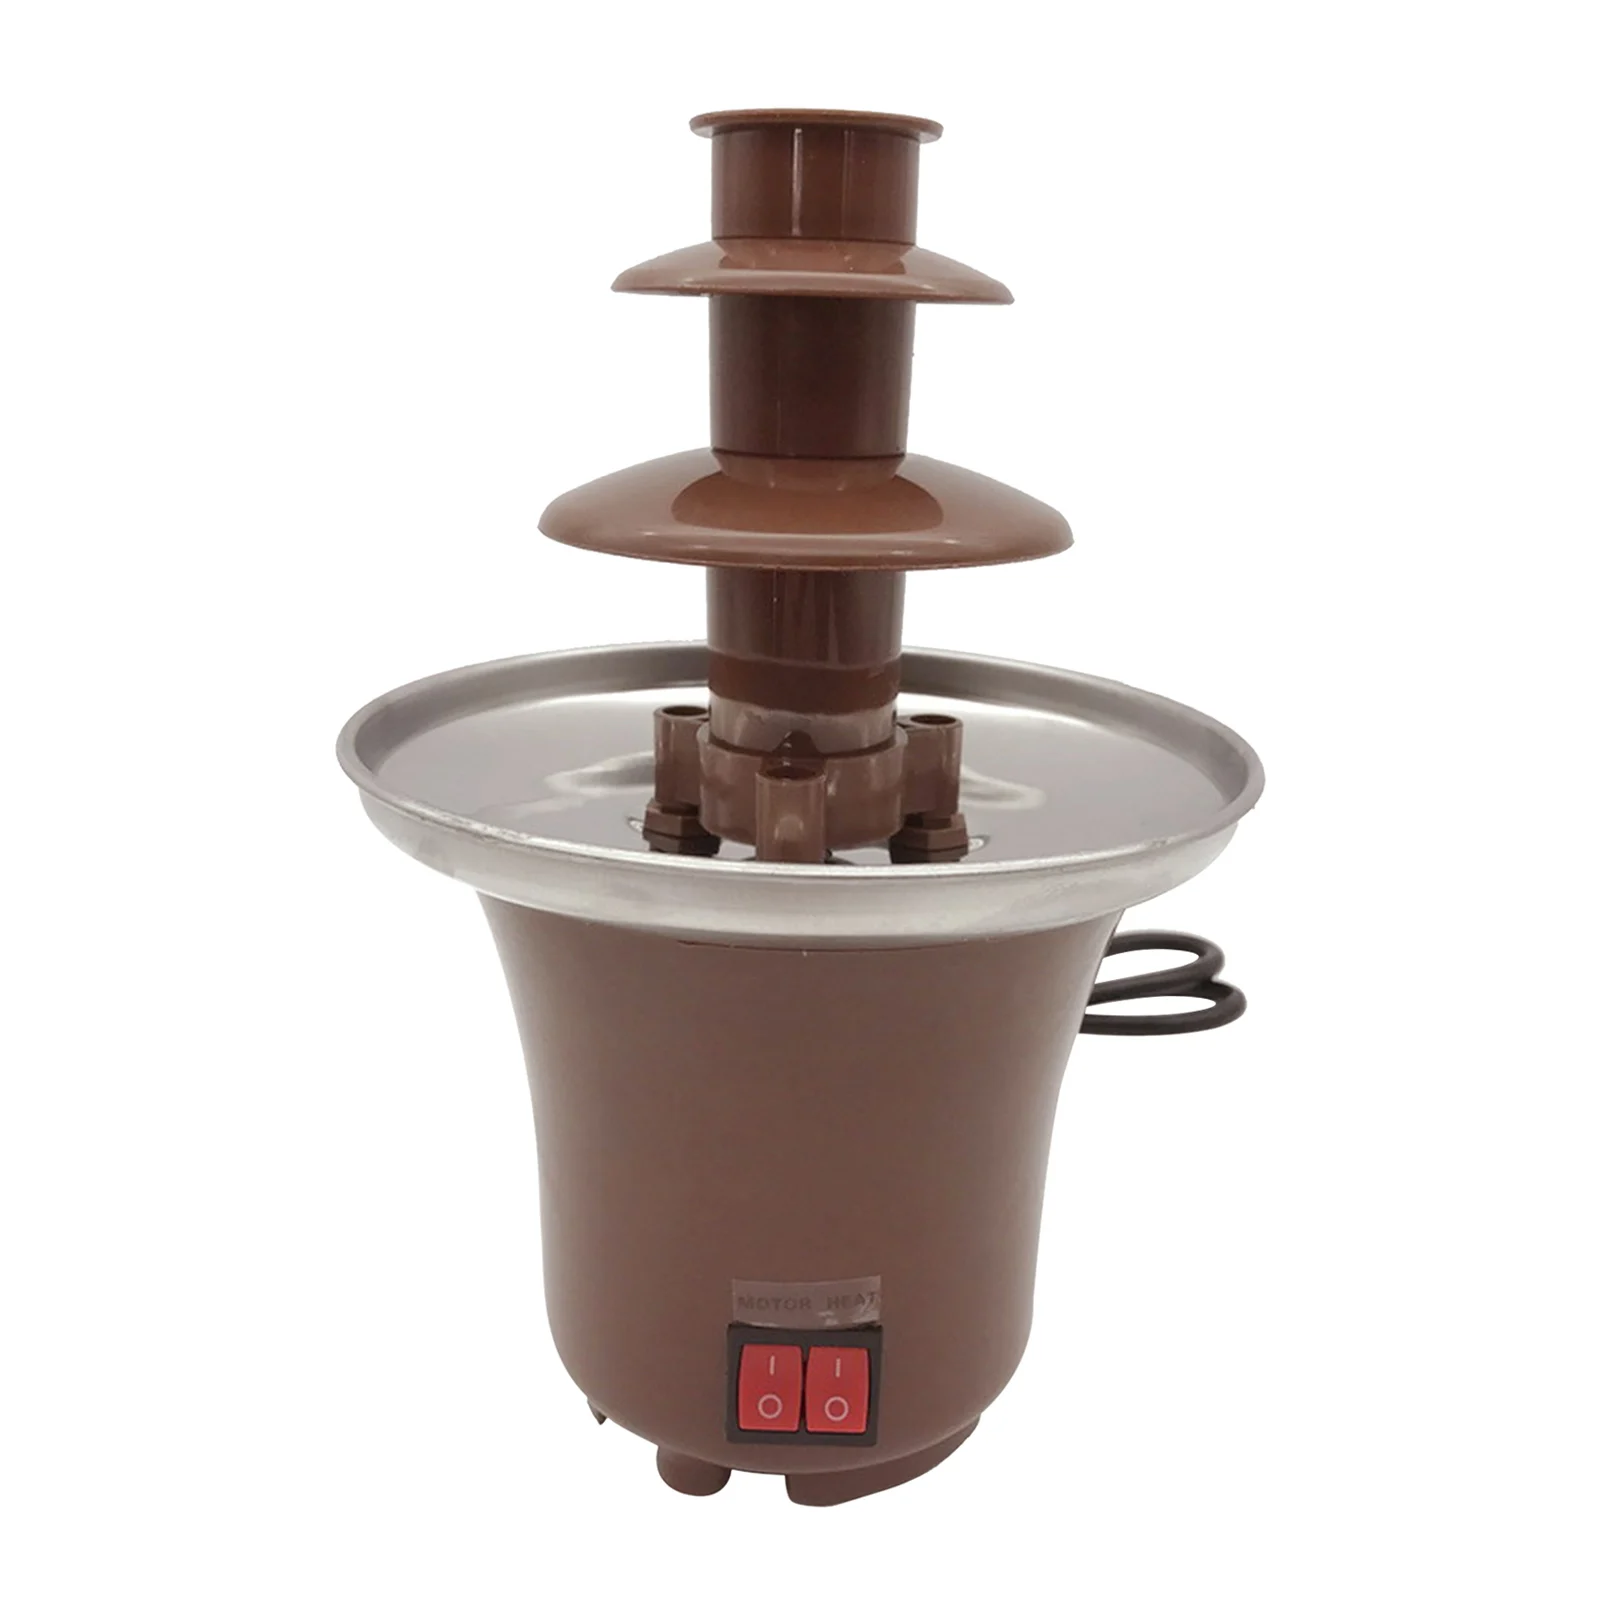 Electirc Compact Chocolate Melt With Heating Fondue Fountain Easy to Assemble 3 Tiers BBQ Sauce Ranch Liqueurs, UK Plug